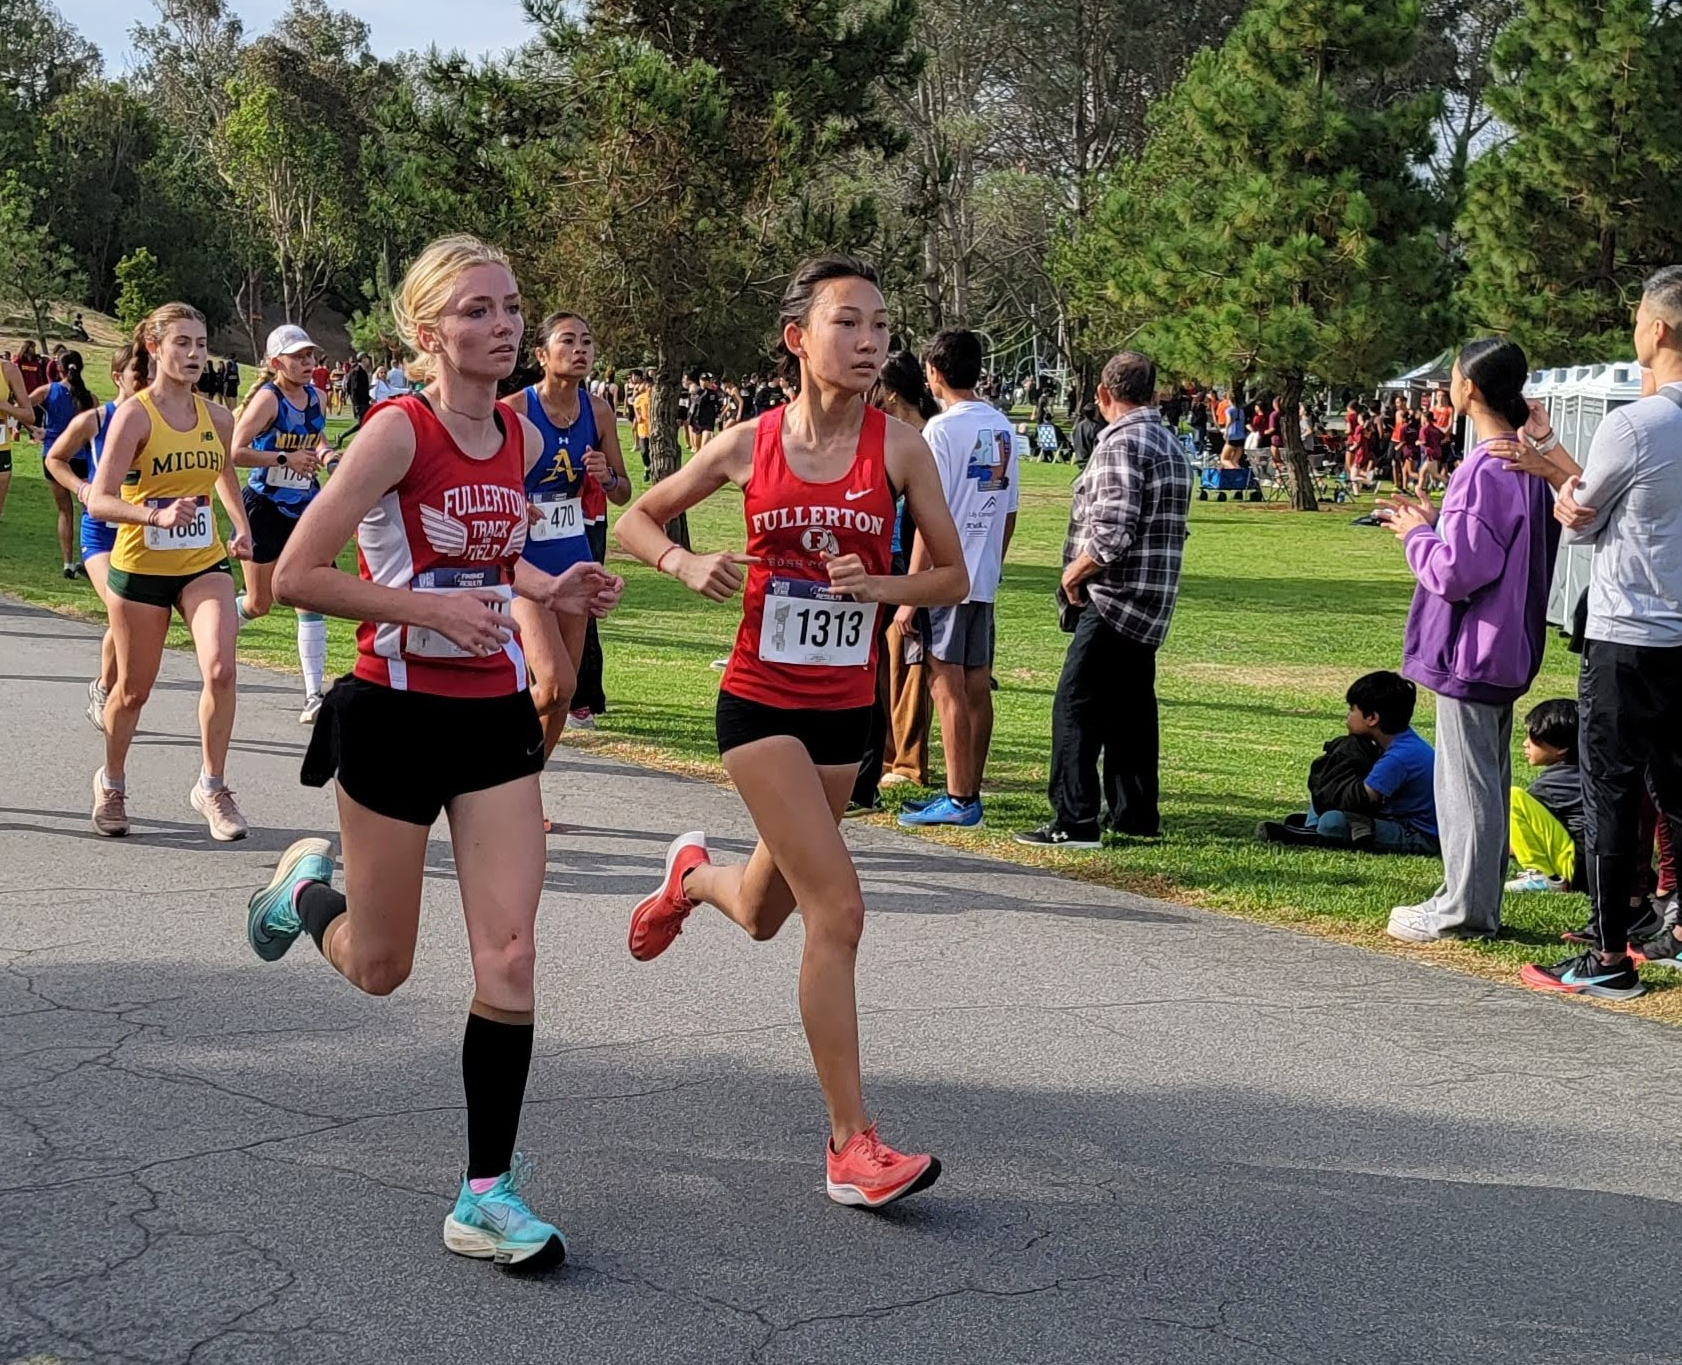 Senior Reagan Glidewell (left) and sophomore Sofia Tabbal (right) pack run together. Glidewell sits in seventh (19:14) followed by Tabbal in eighth (19:33) on the all-time Fullerton record list in the 3-mile distance.